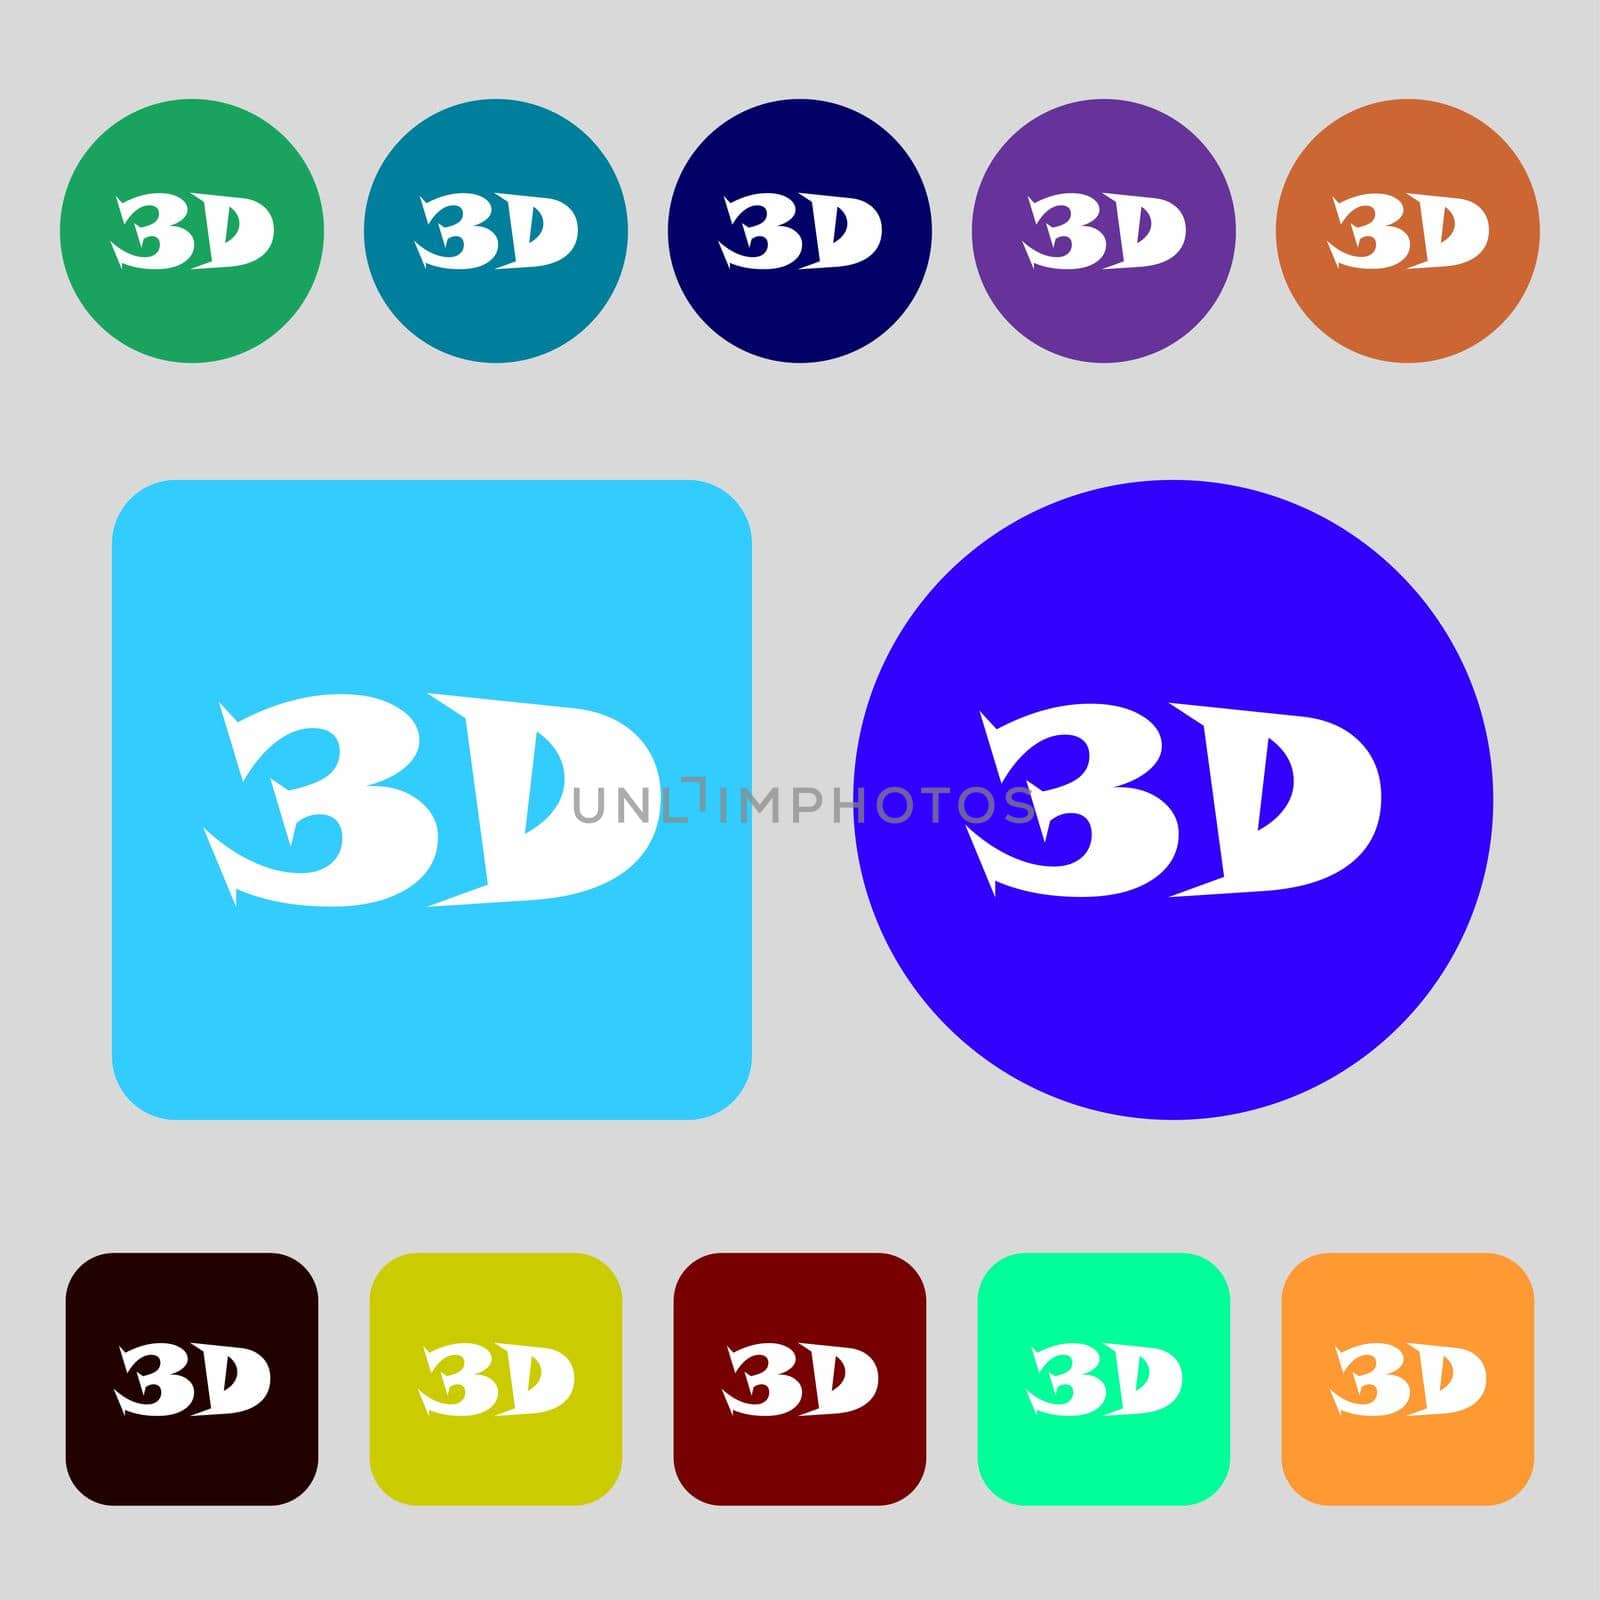 3D sign icon. 3D New technology symbol.12 colored buttons. Flat design. illustration